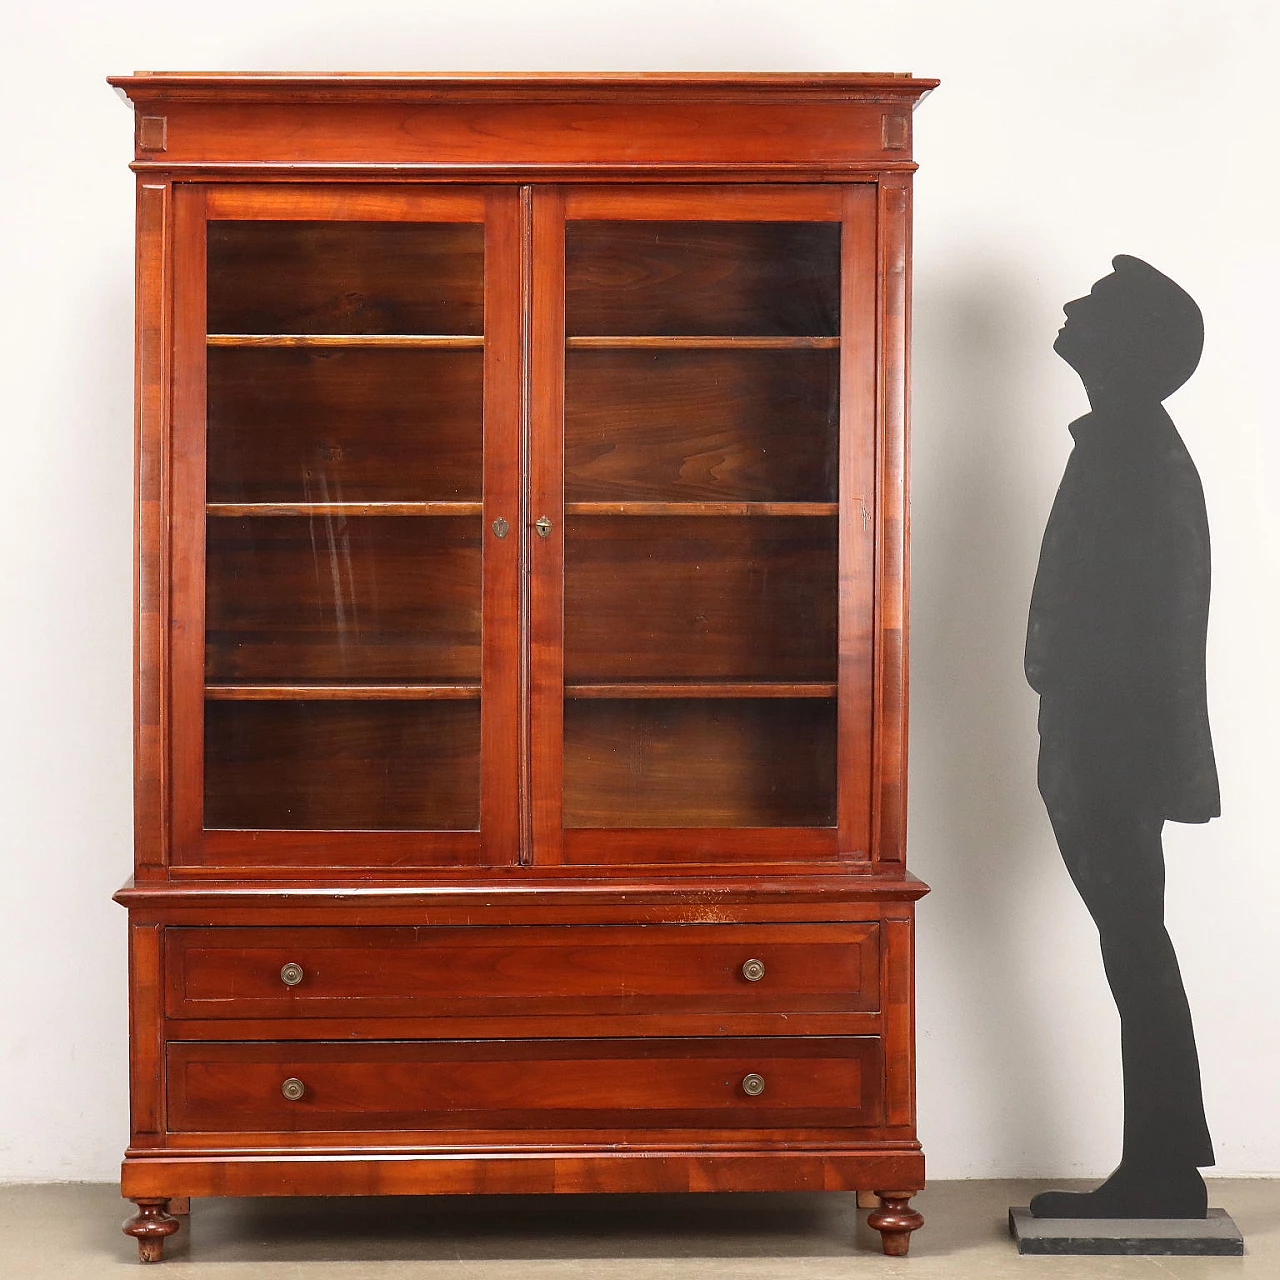 Cherrywood bookcase with drawers and glass doors 2